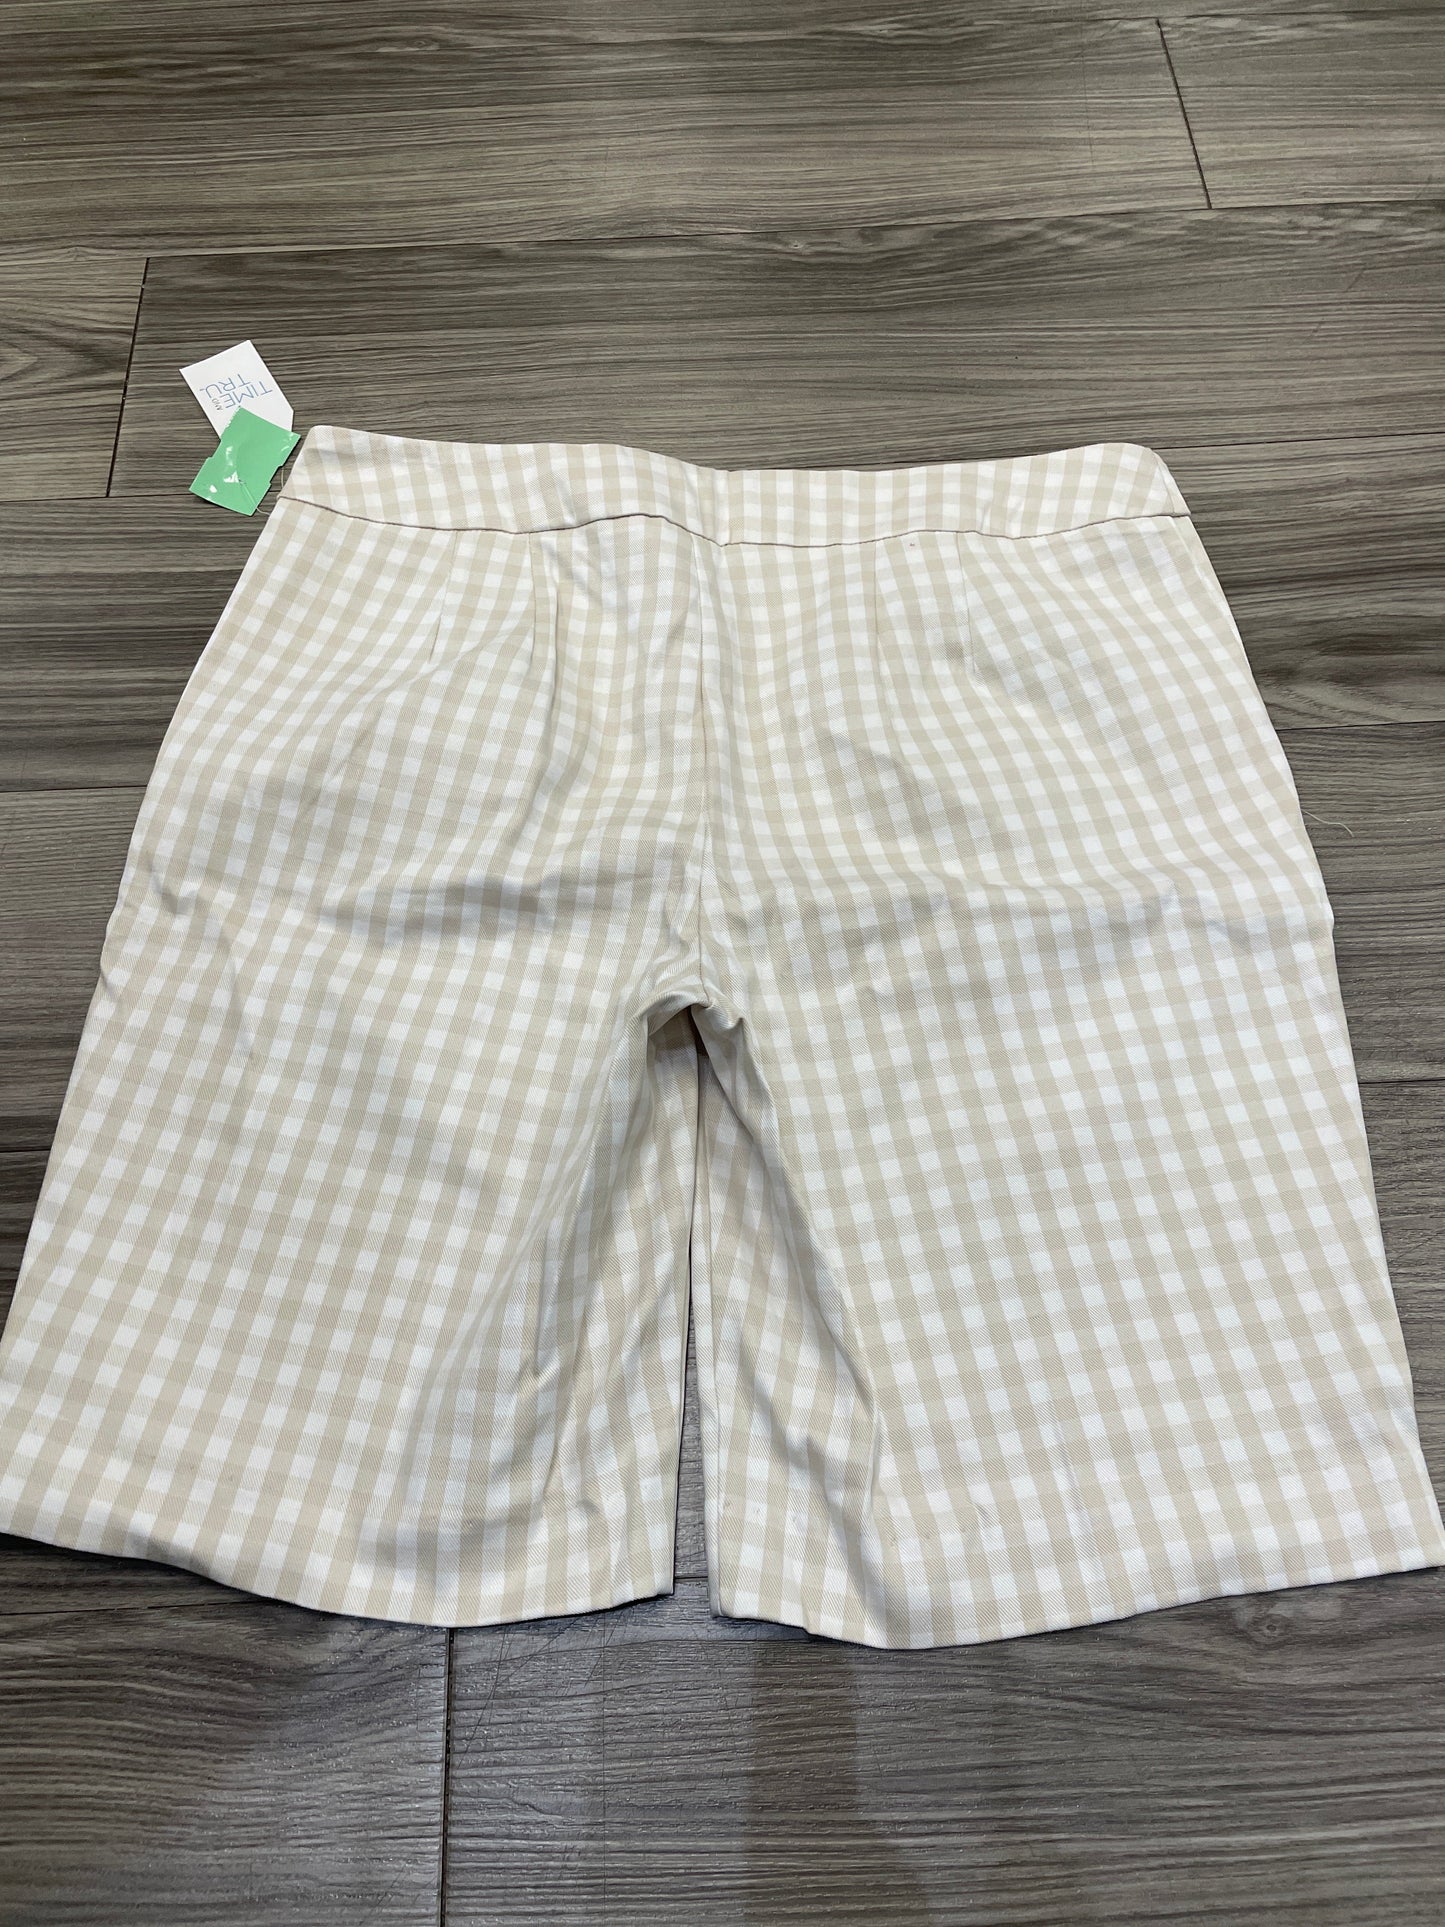 Plaid Pattern Shorts Time And Tru, Size L